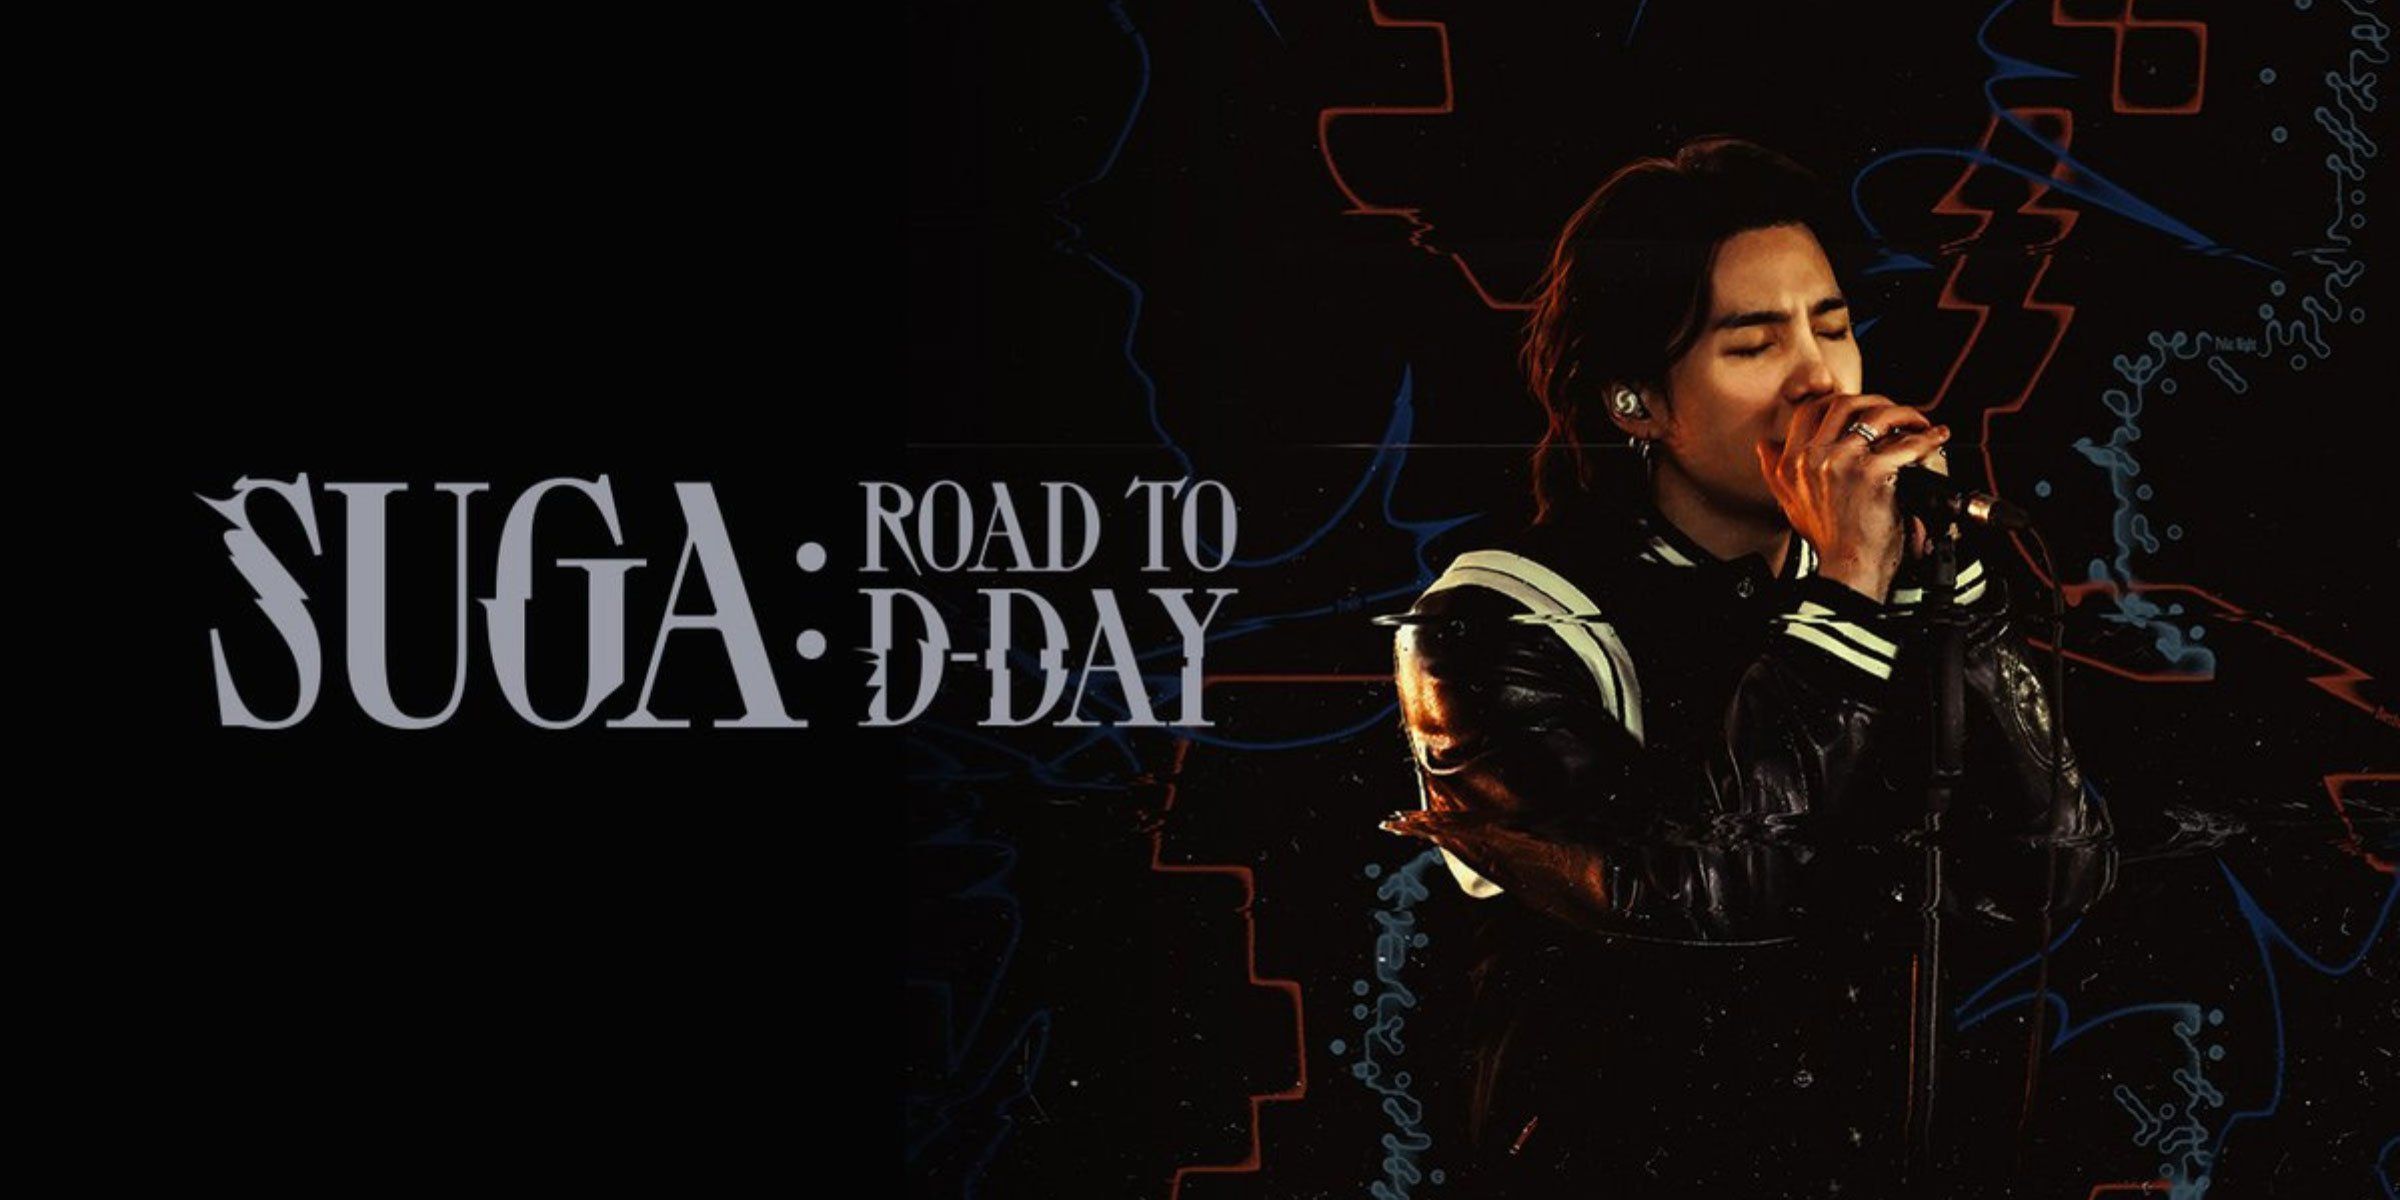 PennsylvAsia: Suga: Road To D Day And J Hope In The Box In Pittsburgh Area Theaters For BTS's 10th Anniversary, June 17